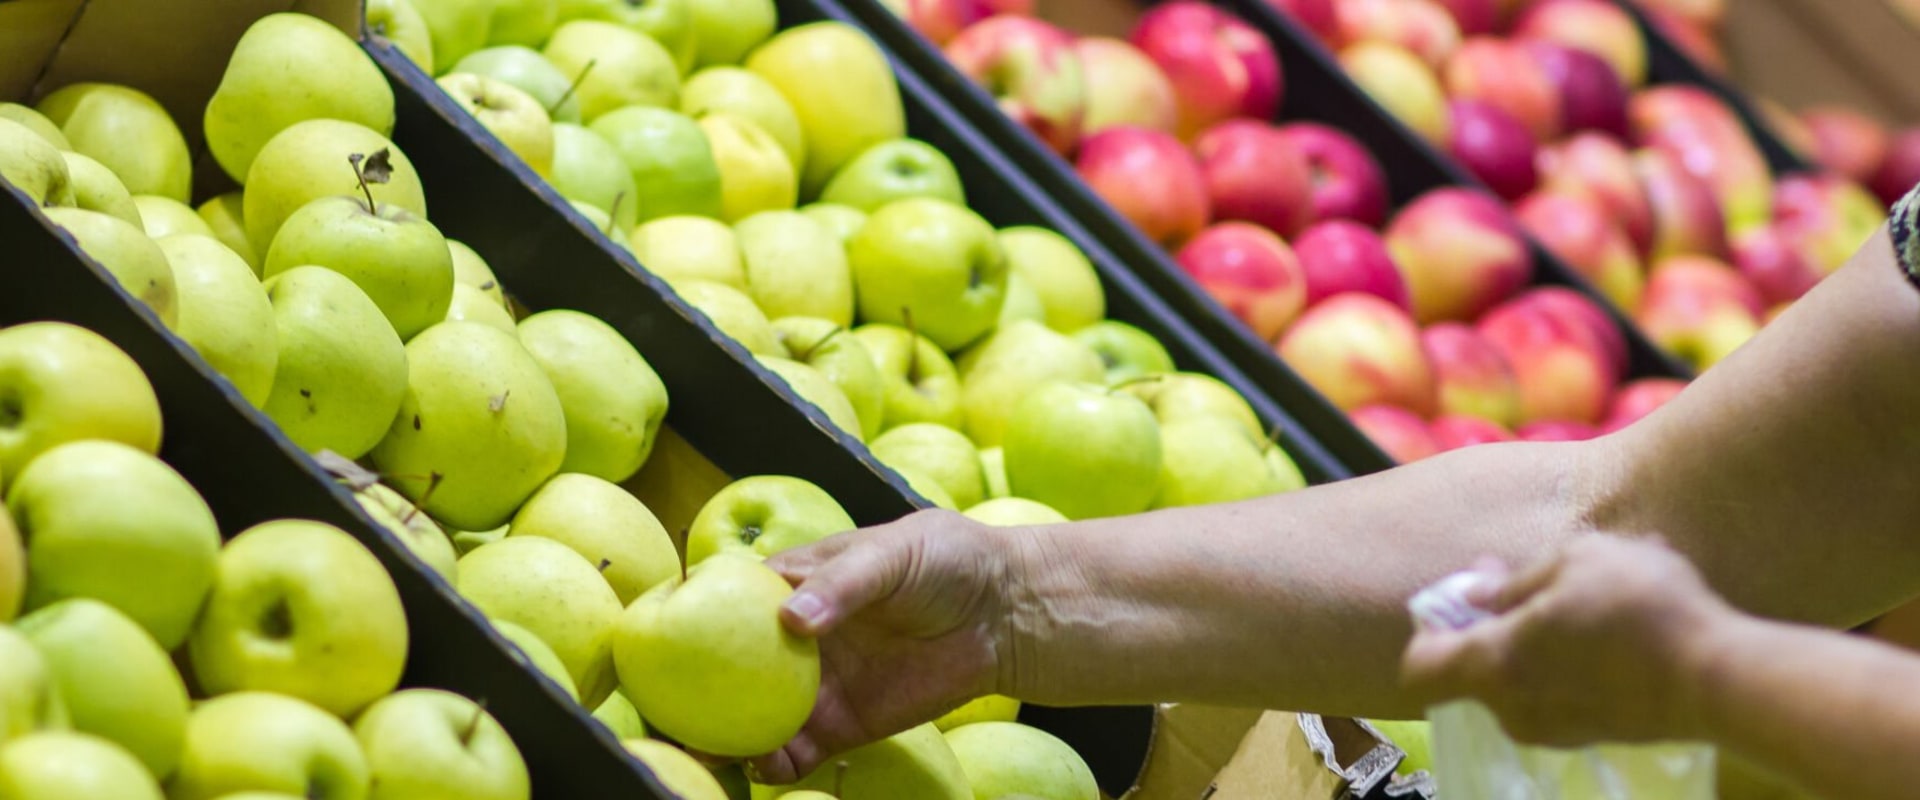 The Best Grocery Stores in California